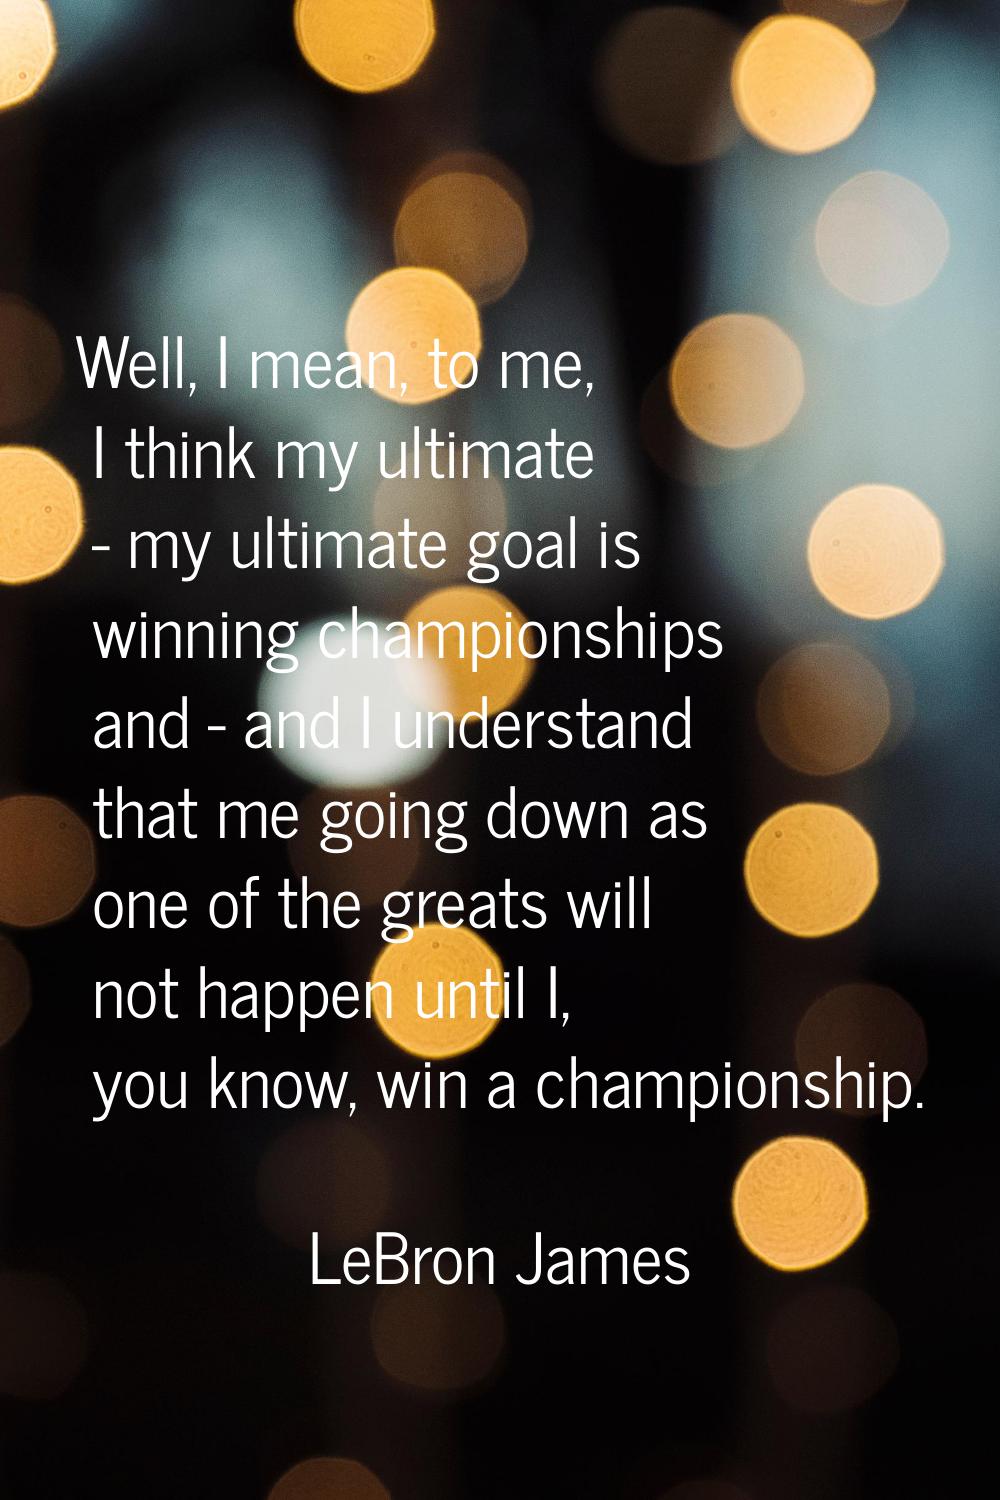 Well, I mean, to me, I think my ultimate - my ultimate goal is winning championships and - and I un